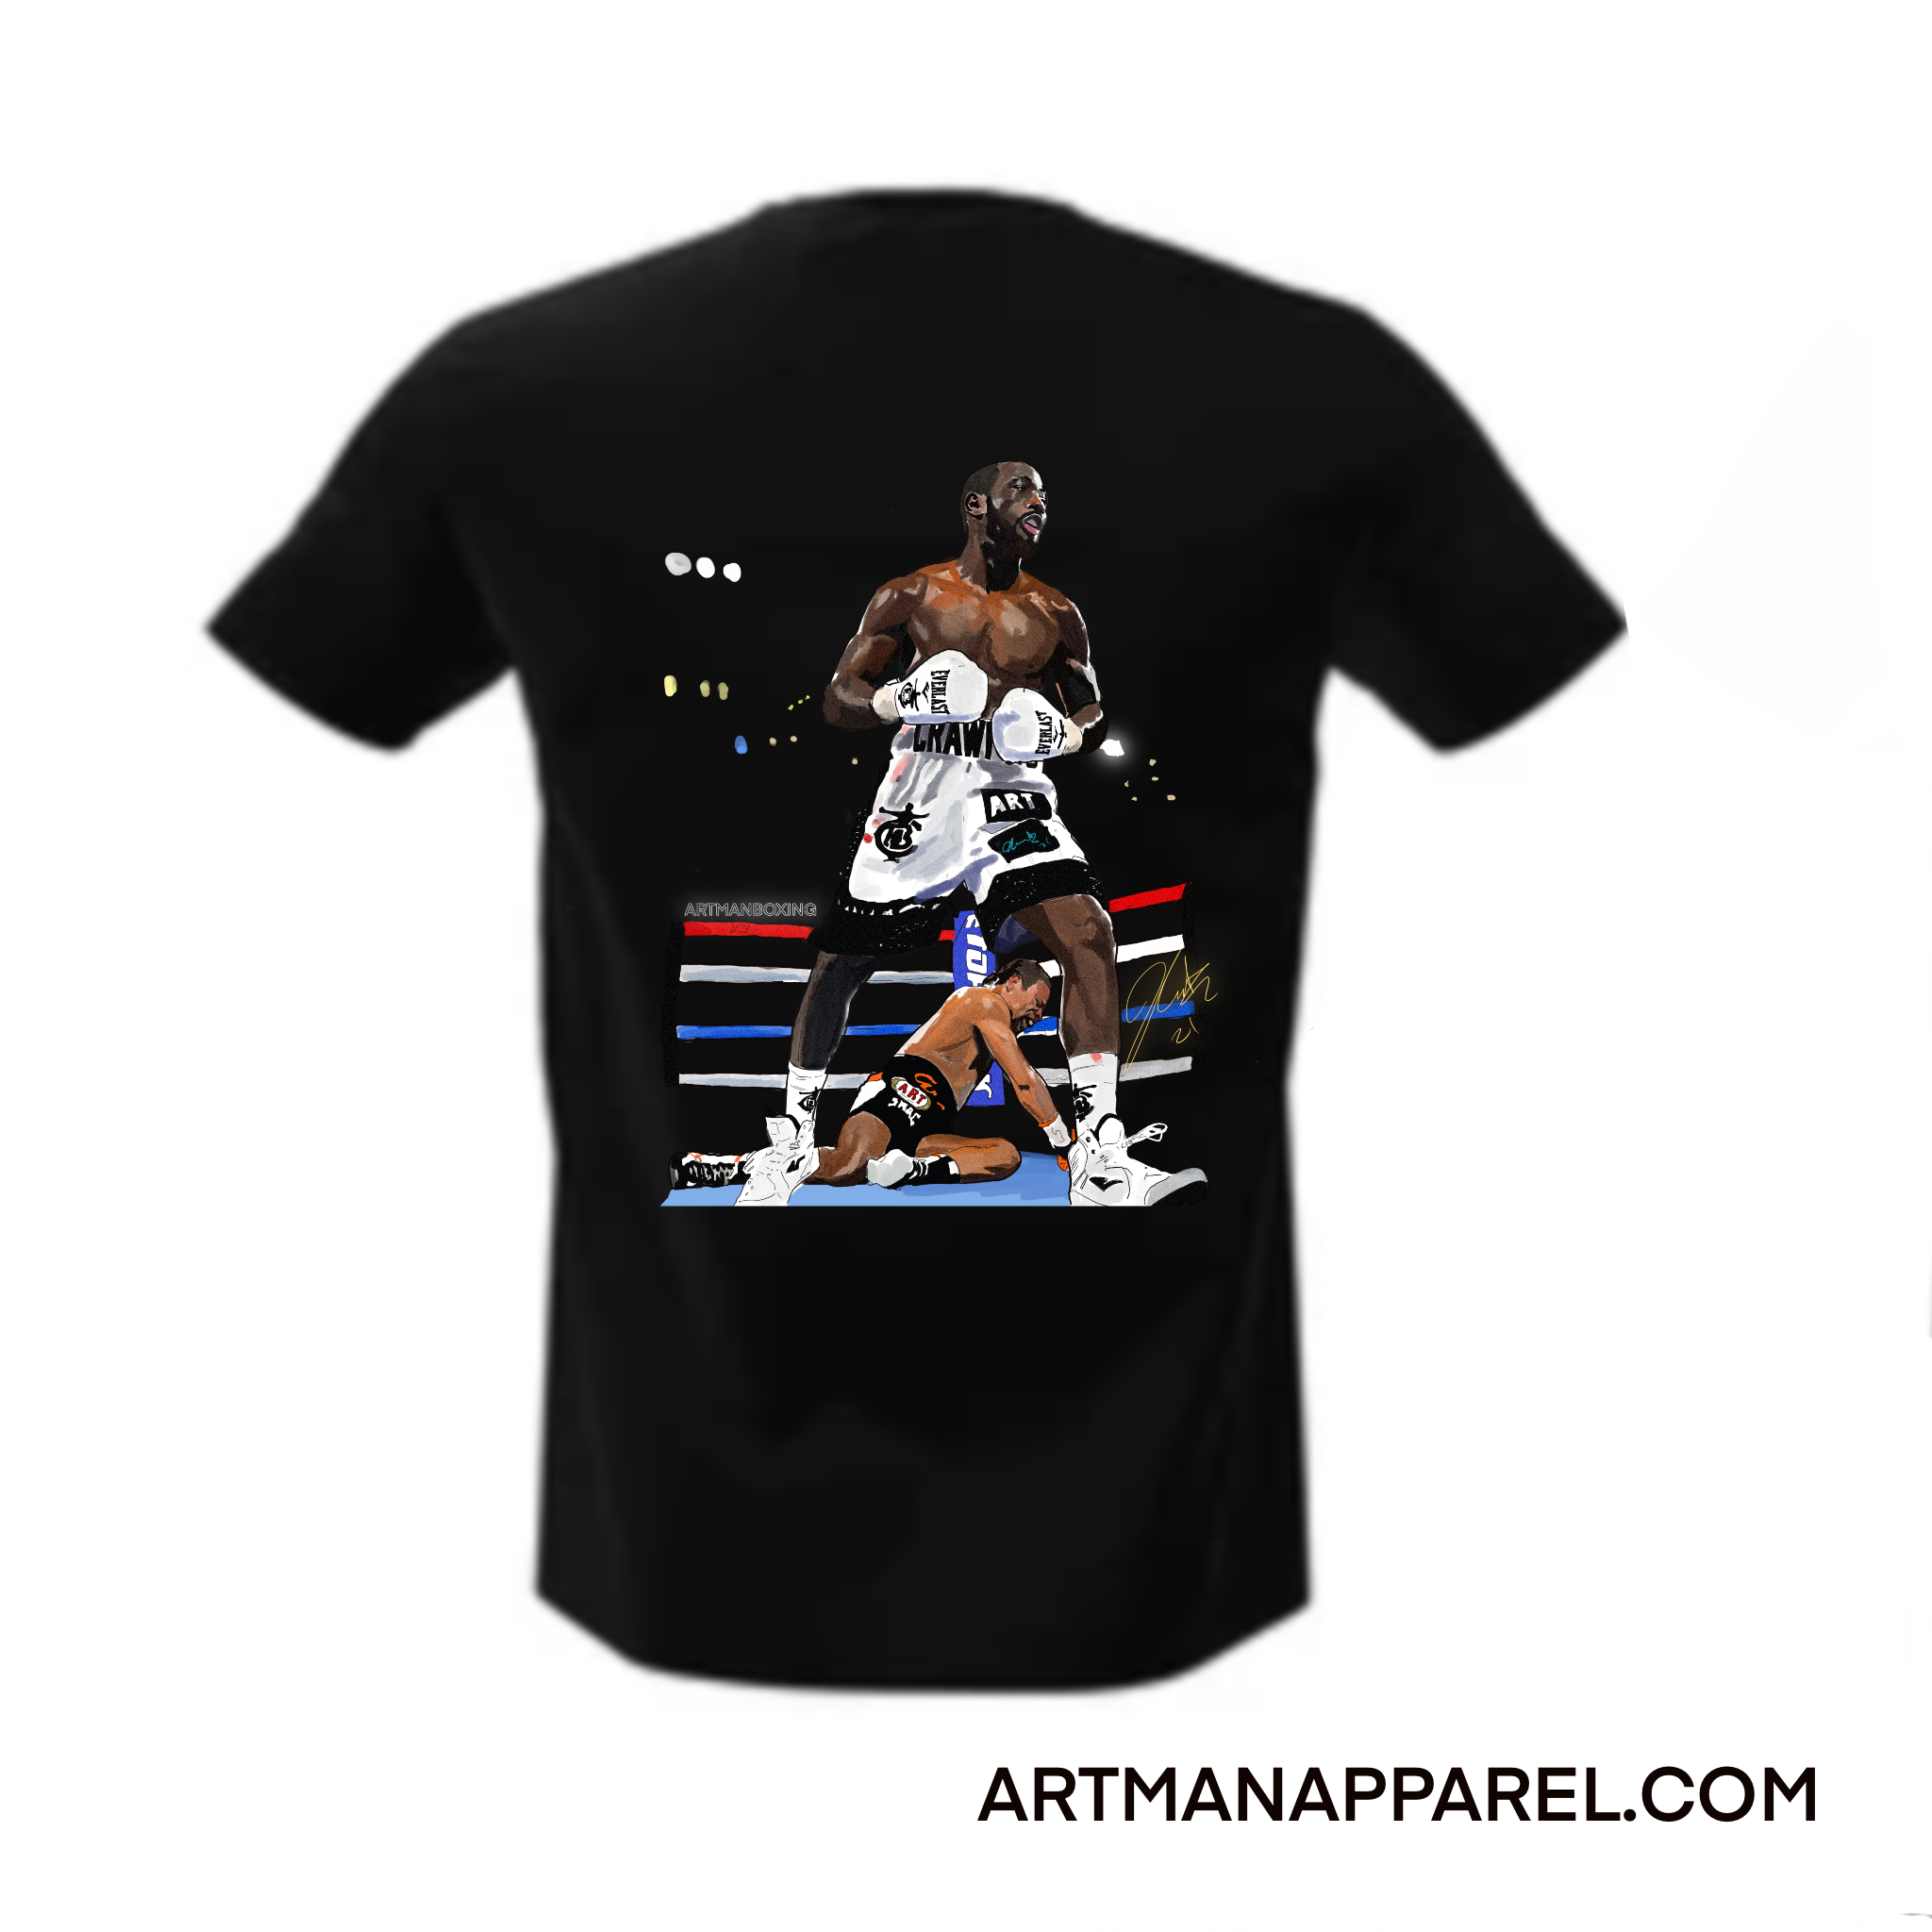 P4P status solidified (blk shirt )